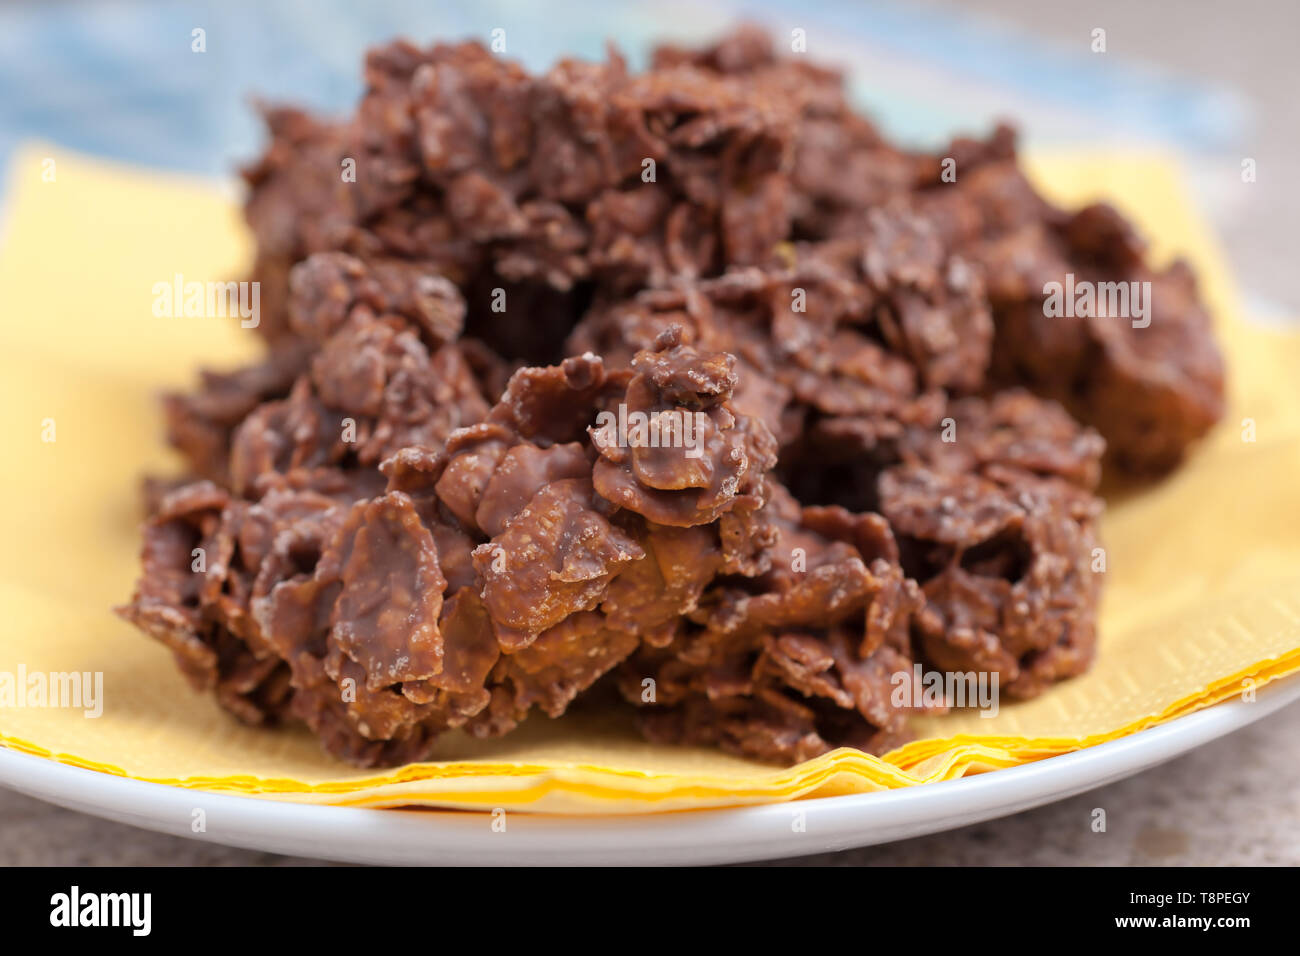 Chocolate corn flake cakes a simple party cake recipe for children to make Stock Photo